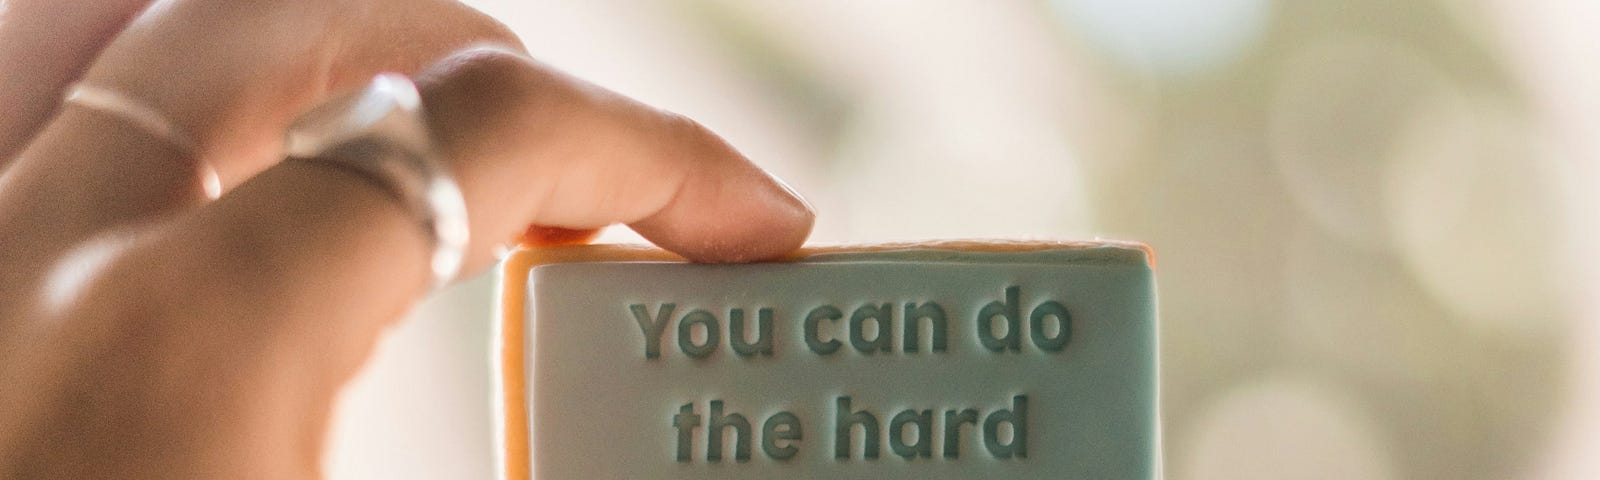 woman’s hand holding up a sign that says “ you can do the hard things.”